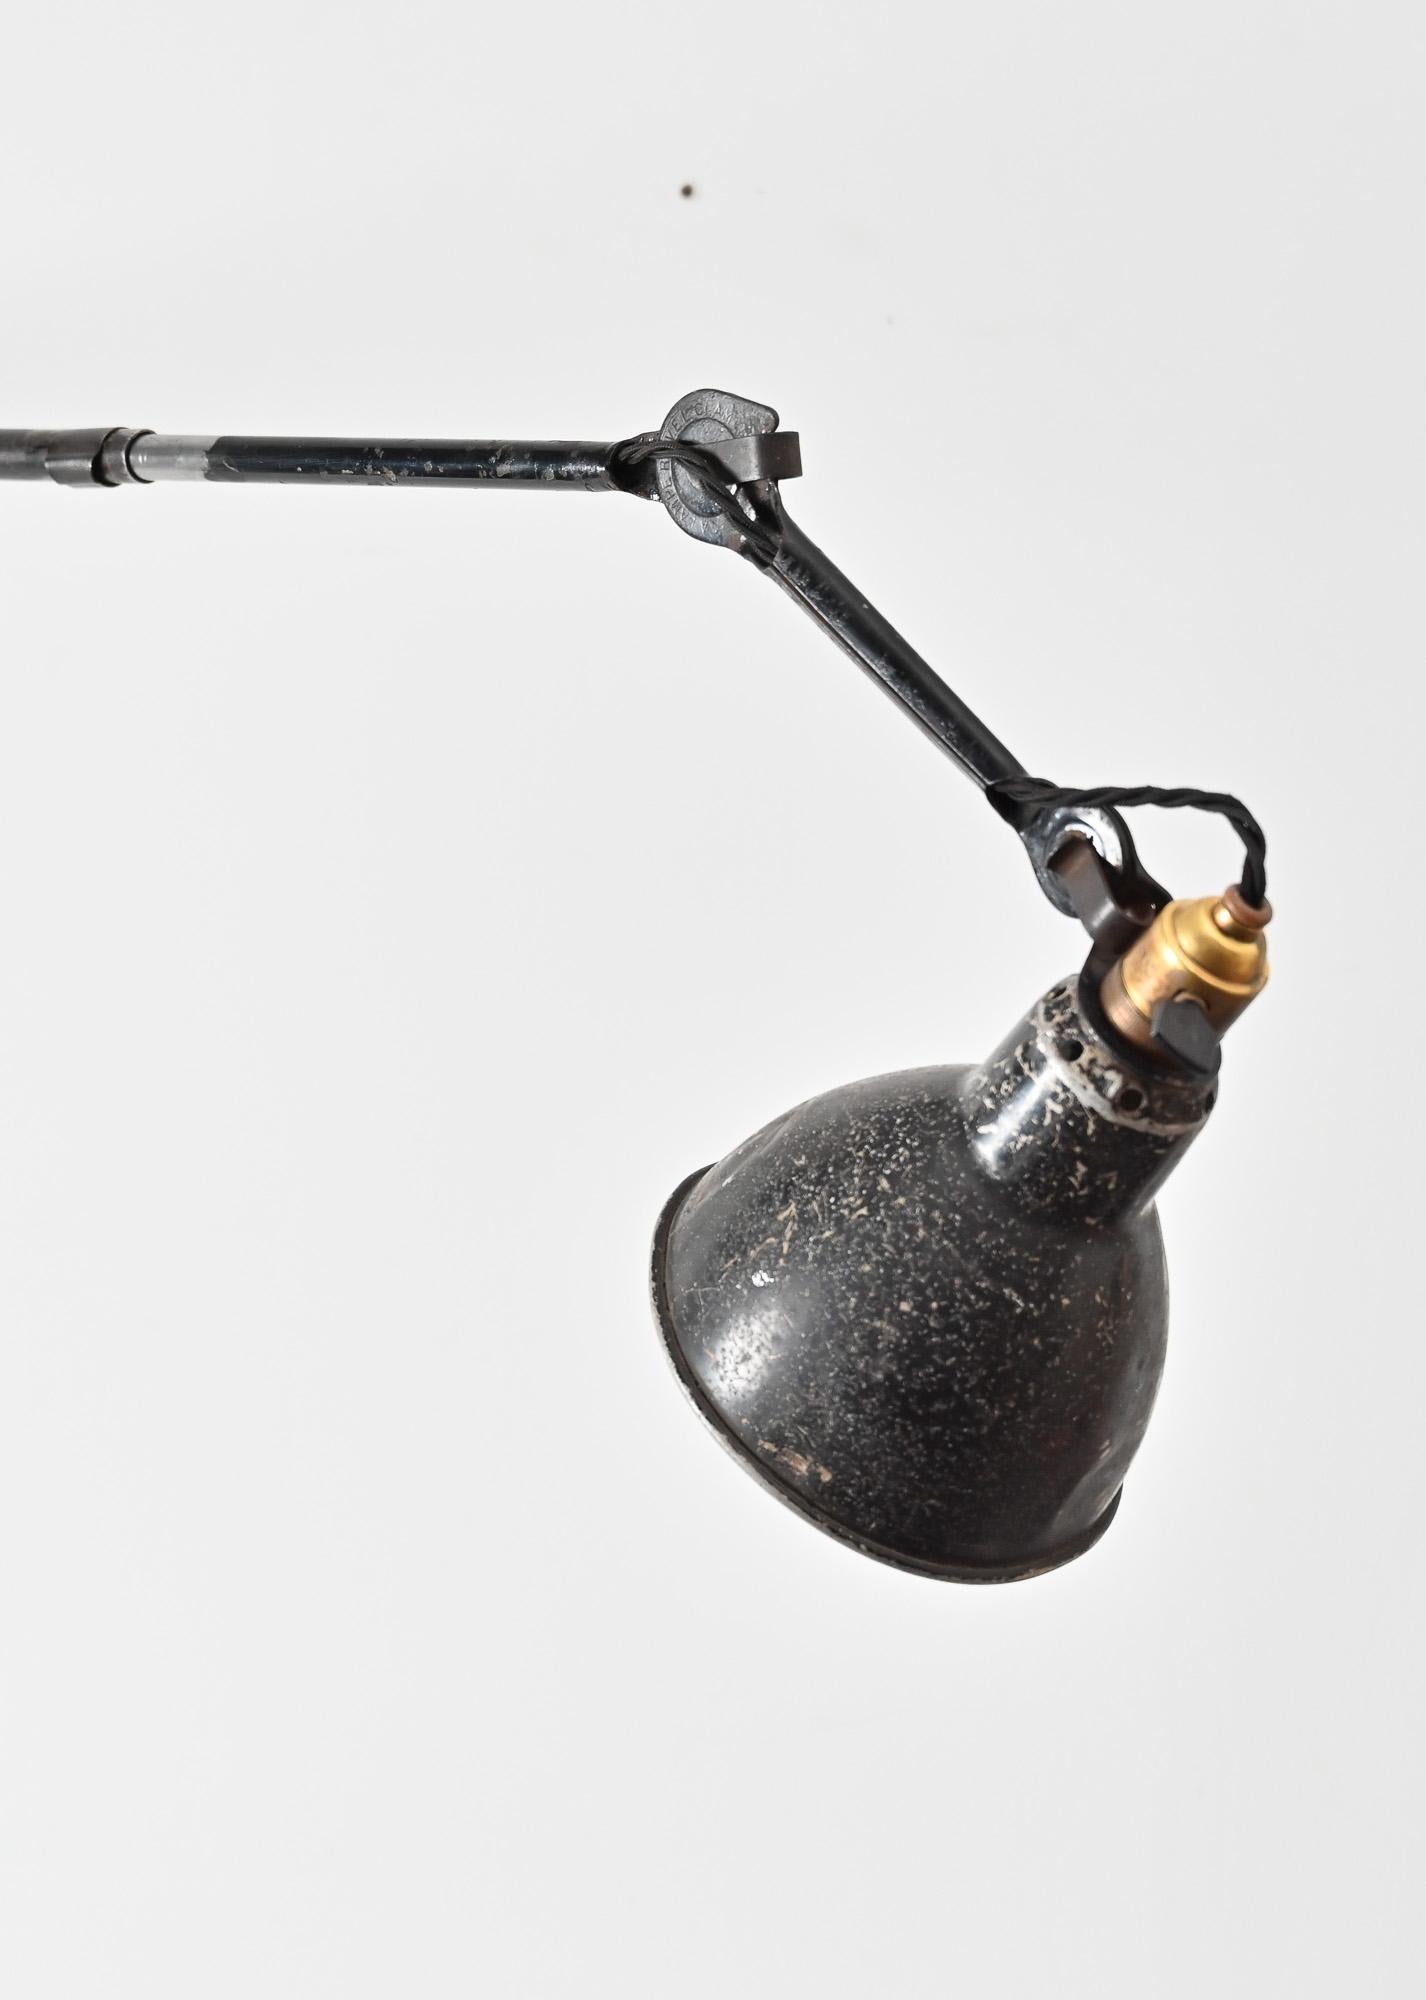 Bernard Albin Gras 203 model adjustable wall lamp Adjustable D.G.R. No. 203 fixe-mural
France circa 1930
The Gras lamp became popular when Le Corbusier started to use them first in his offices and then for his customer projects.
Bibliography :